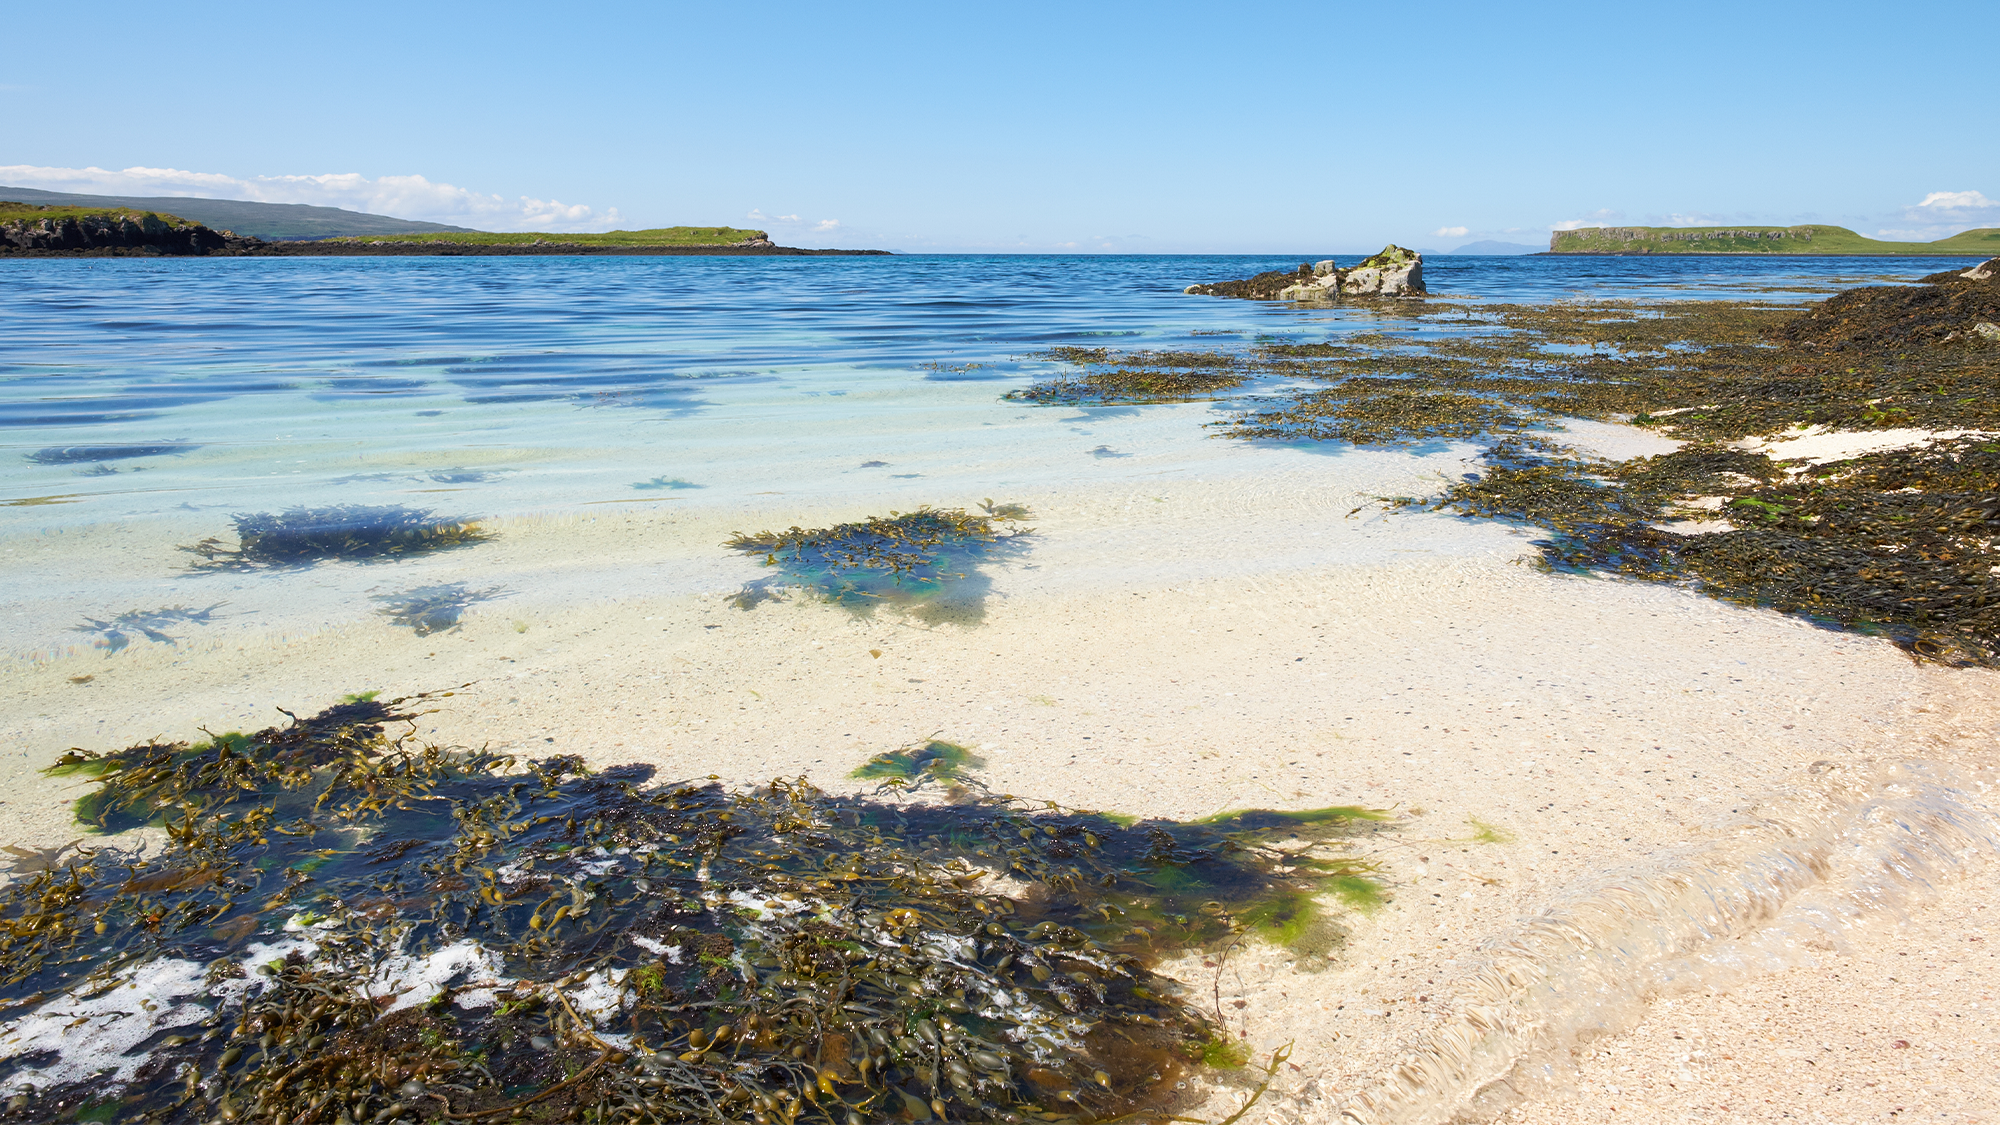 Coral Beach on Scotland’s Isle of Skye, dotted with various types of seaweed.